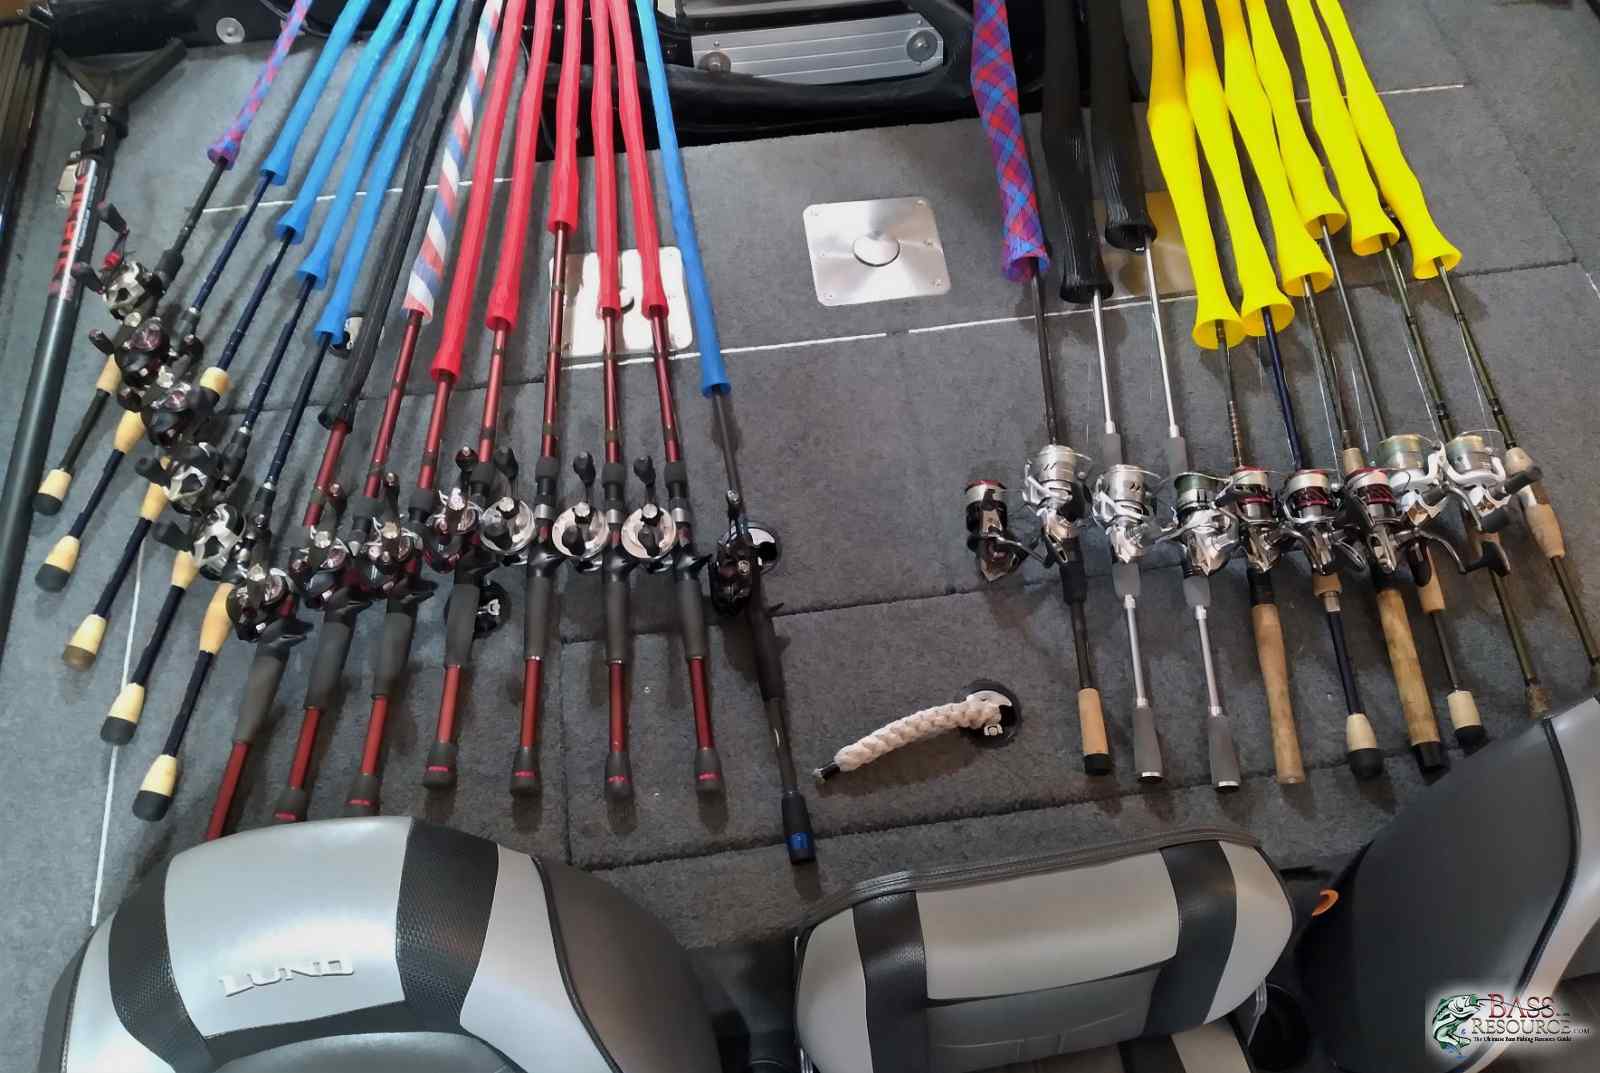 Rod selection decision - Fishing Rods, Reels, Line, and Knots - Bass Fishing  Forums